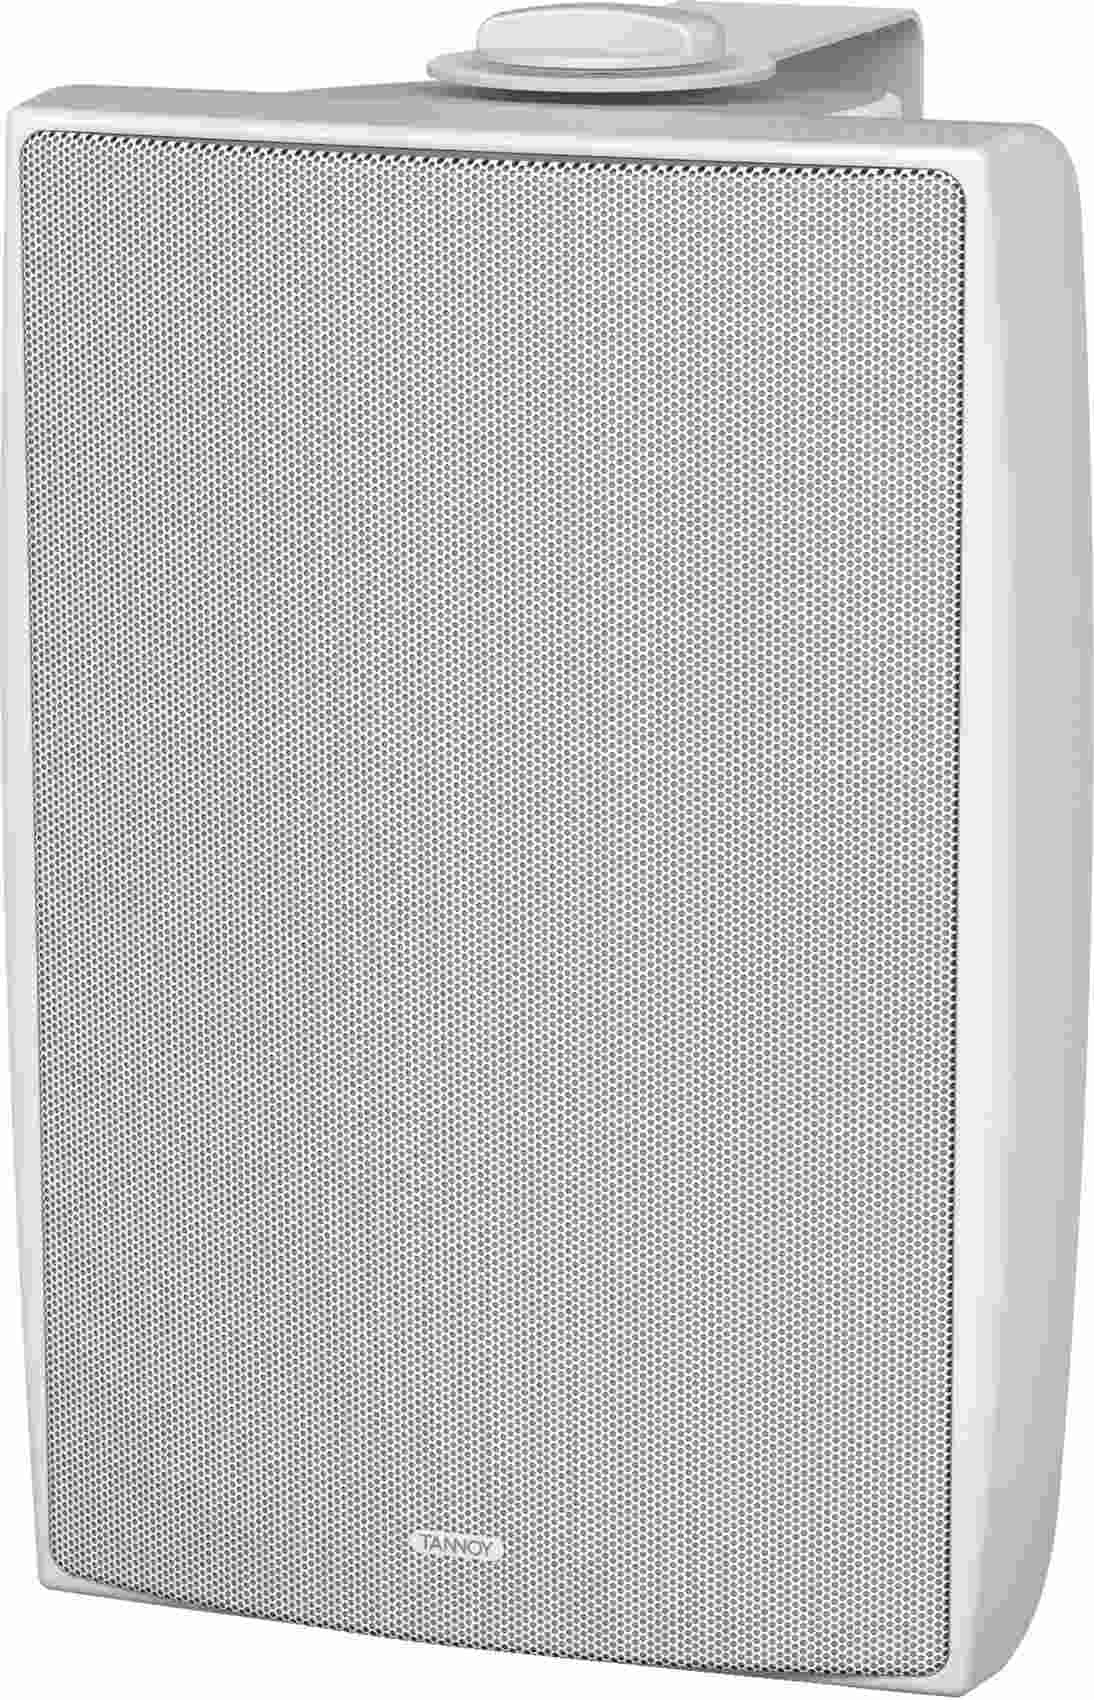 Tannoy DVS 6T-WH - фото 5